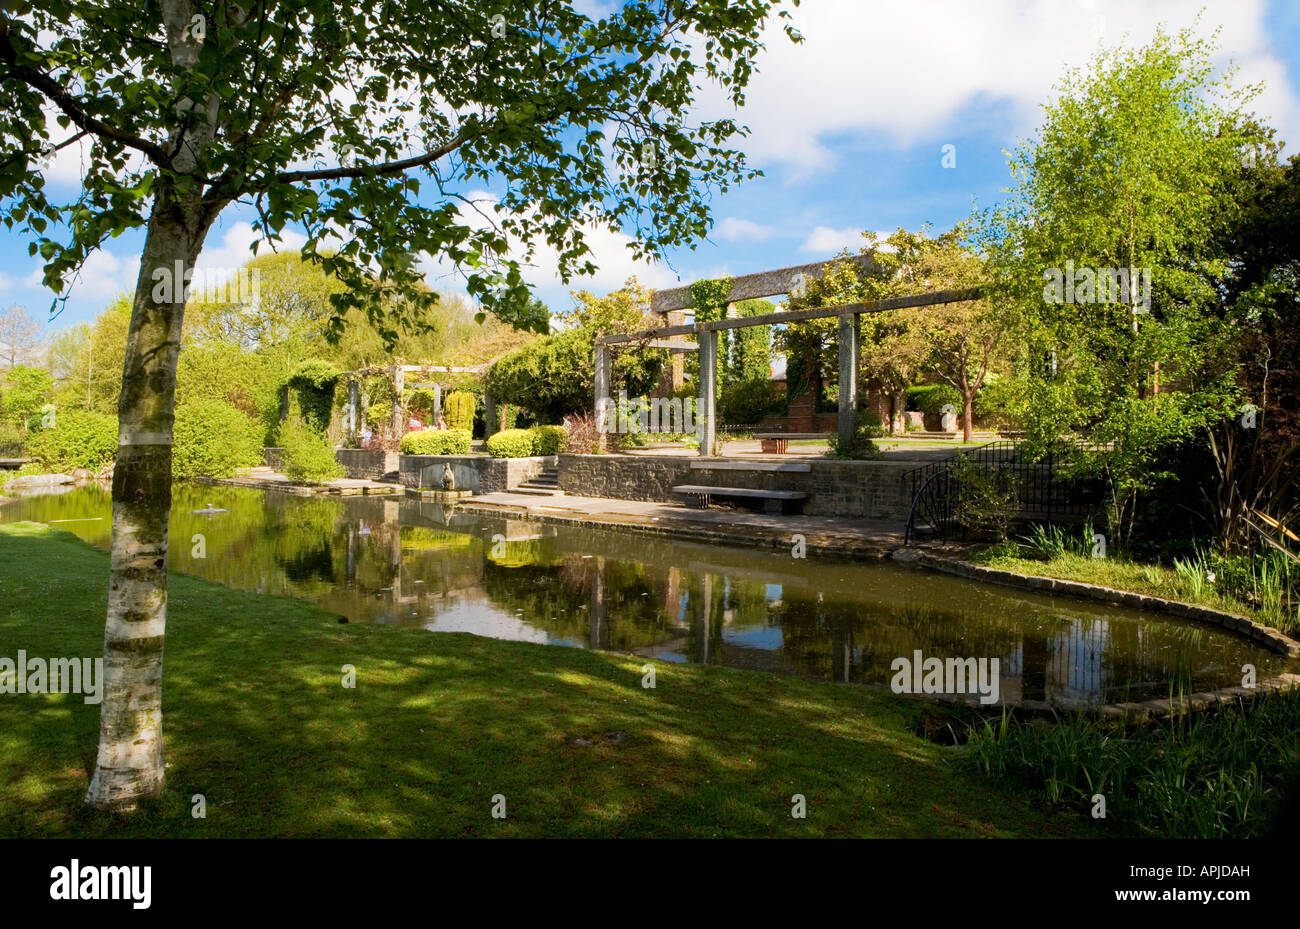 The pond and cafe terrace at Queen's Park, Swindon, Wiltshire, England, UK Stock Photo